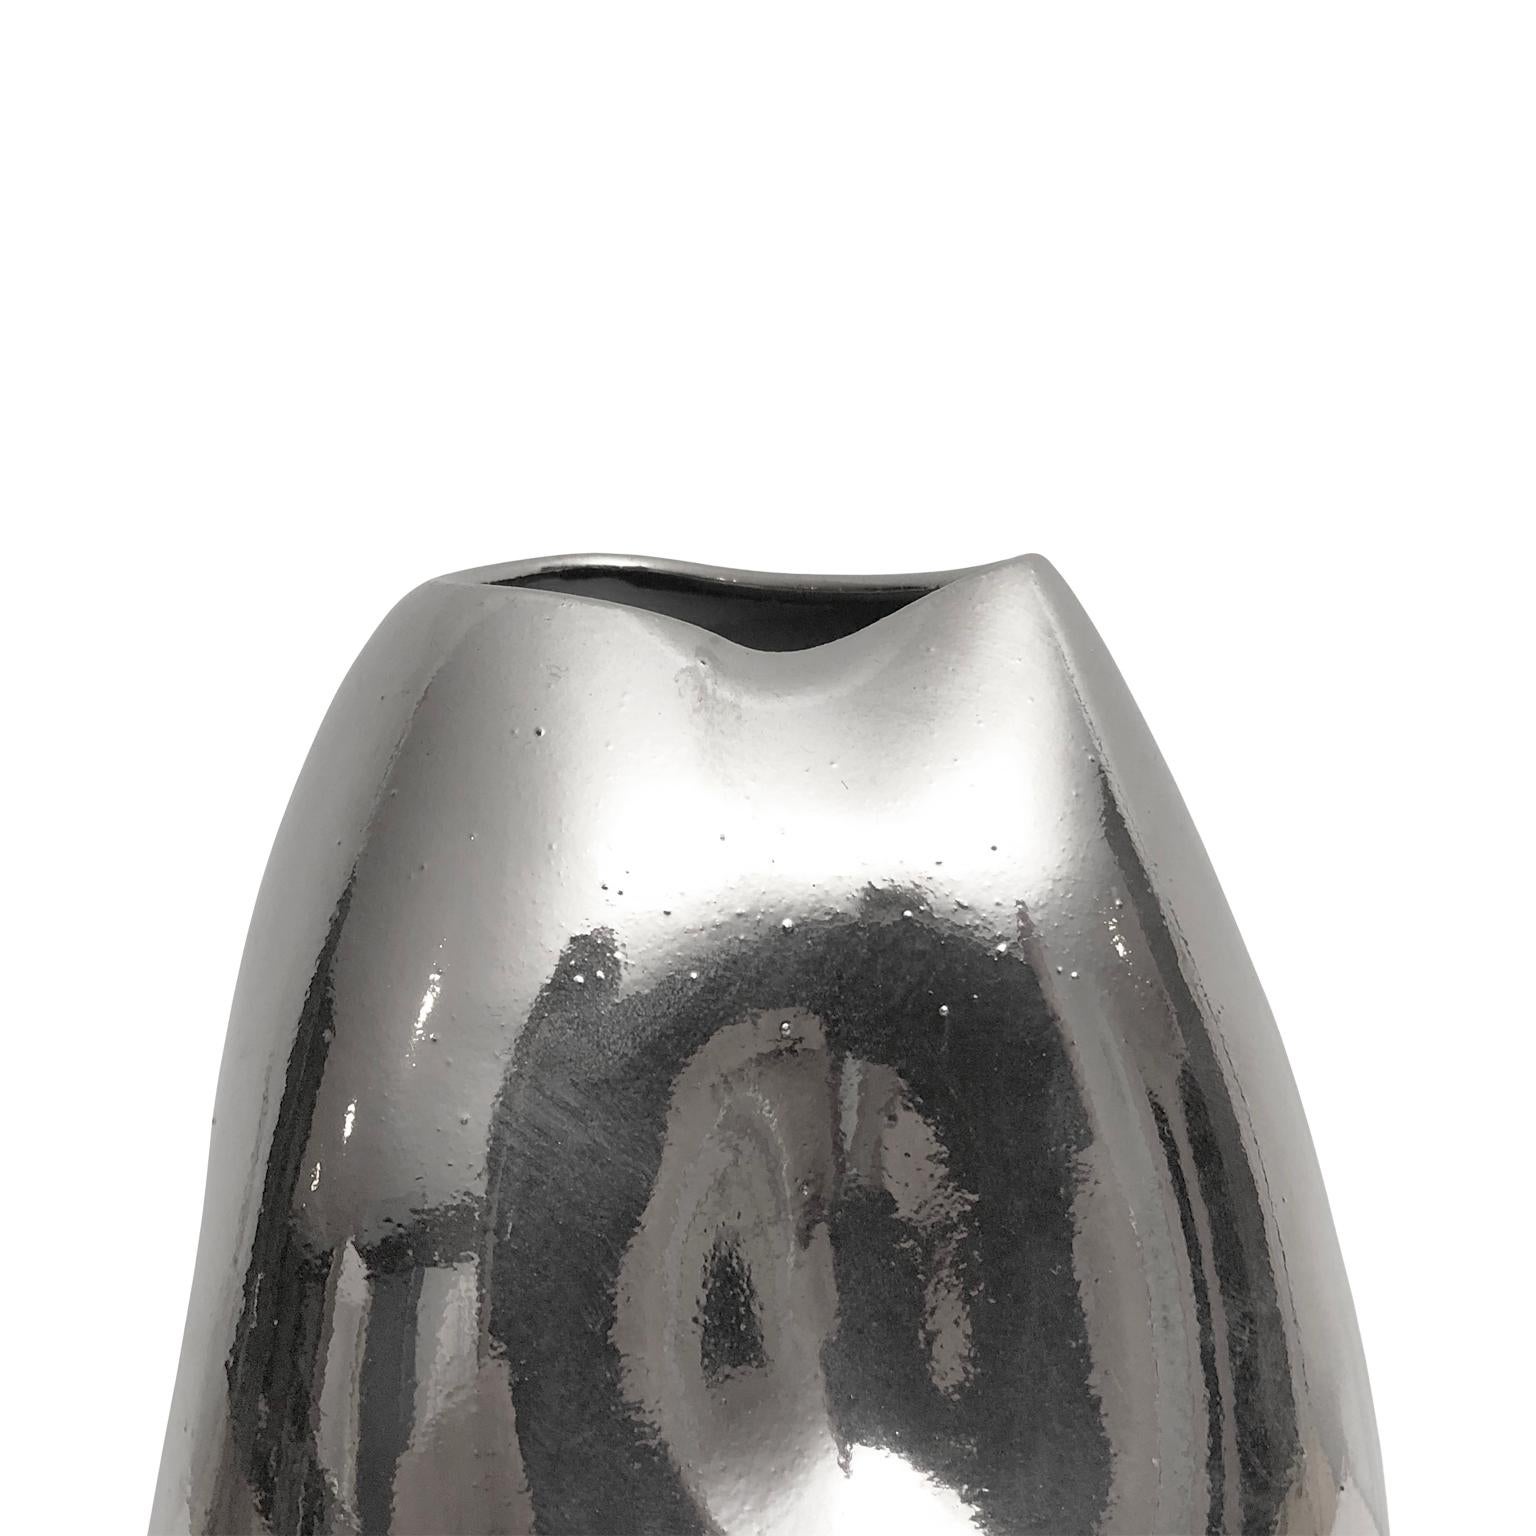 Tall ceramic triple dent vase with polished white gold lustre glaze by Sandi Fellman, 2019. 

Veteran photographer Sandi Fellman's ceramic vessels are an exploration of a new medium. The forms, palettes, and sensuality of her photos can be found